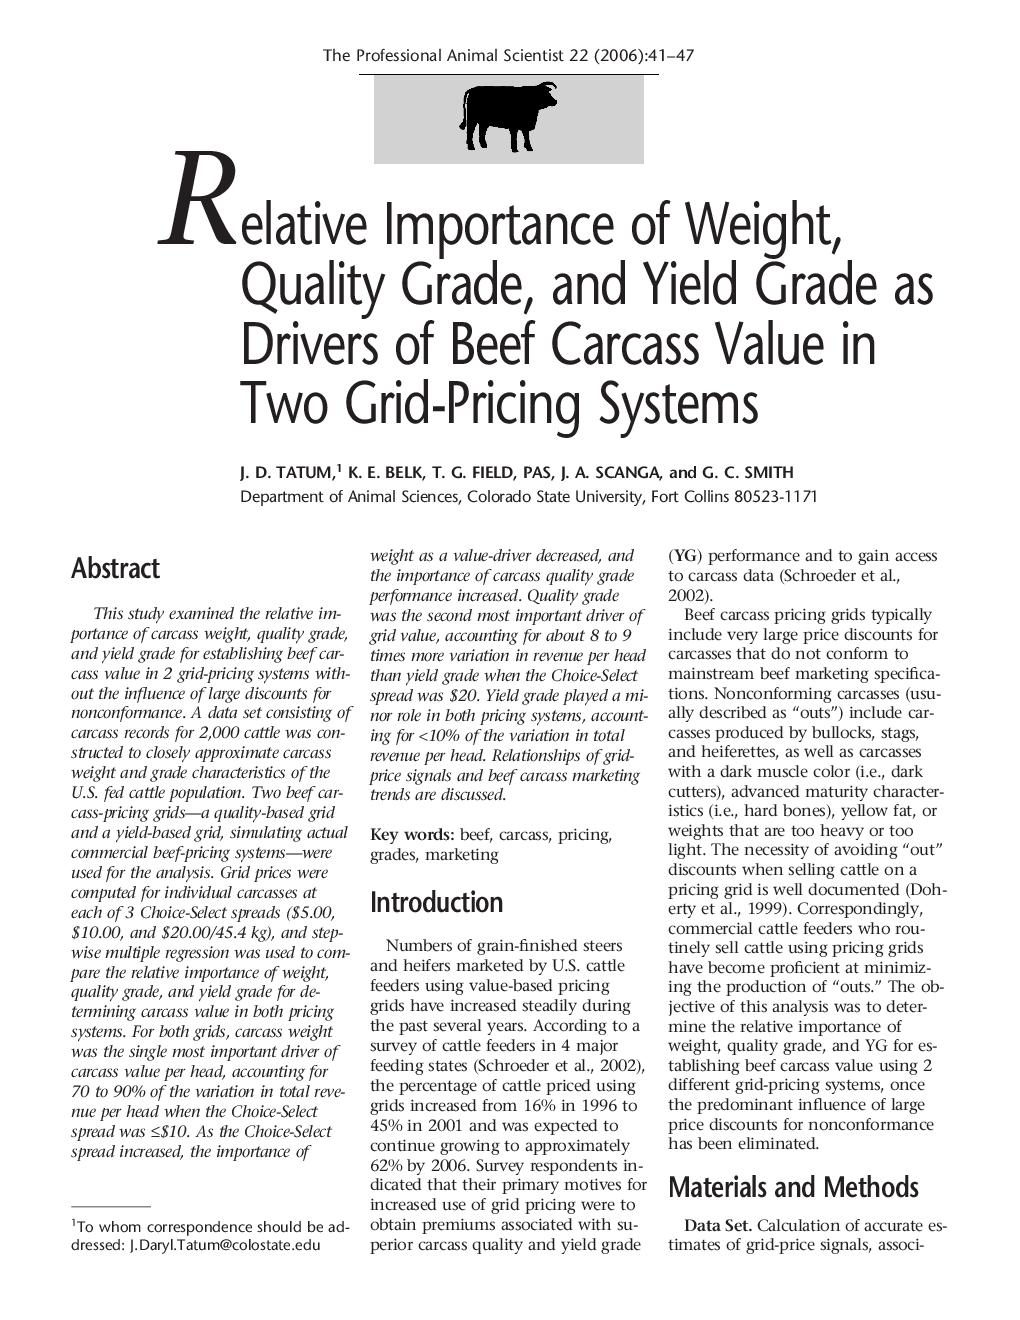 Relative Importance of Weight, Quality Grade, and Yield Grade as Drivers of Beef Carcass Value in Two Grid-Pricing Systems